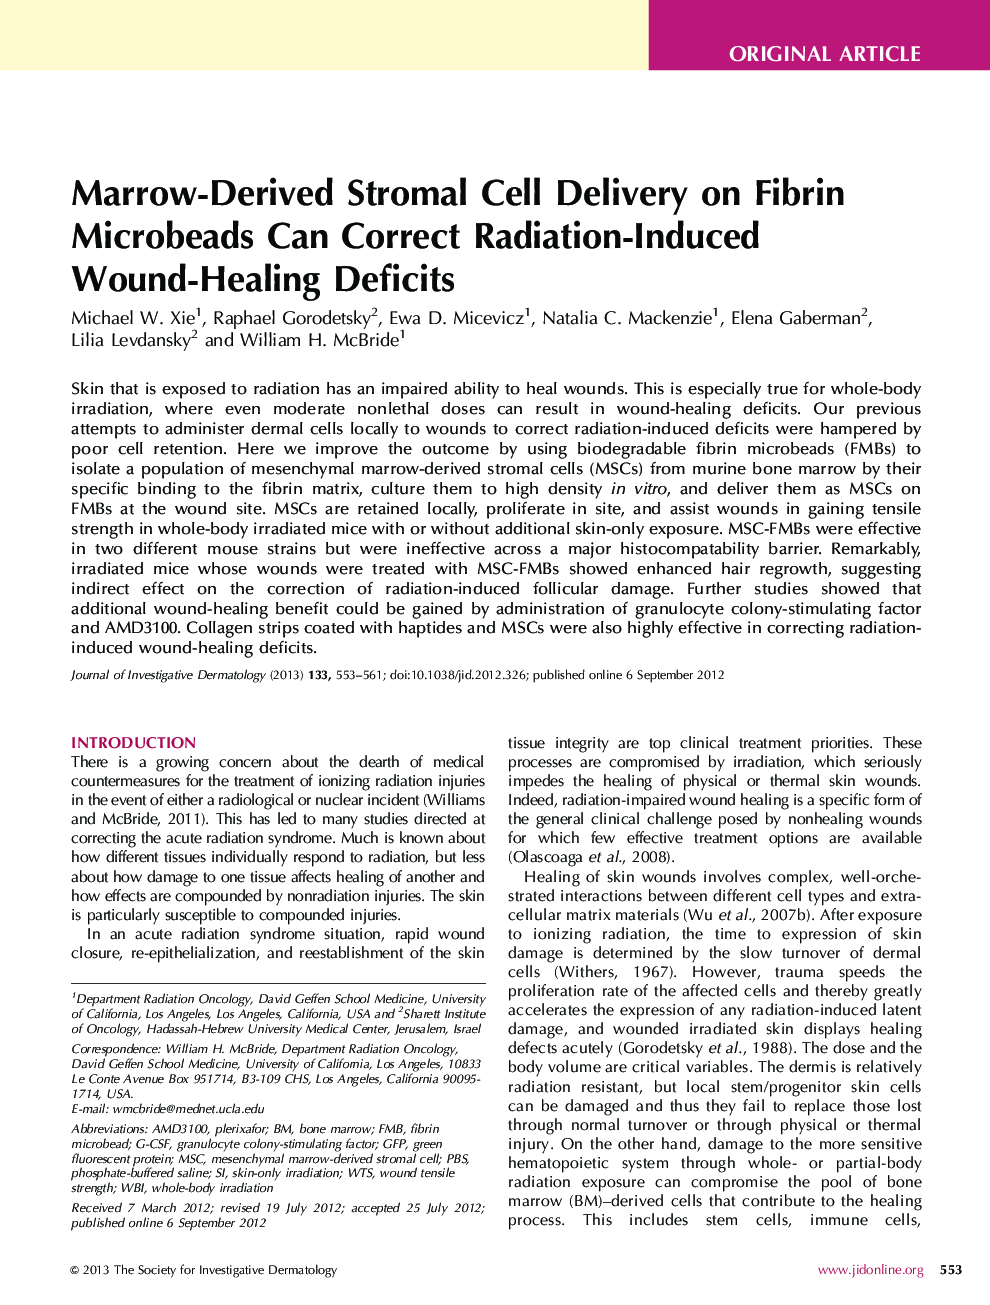 Marrow-Derived Stromal Cell Delivery on Fibrin Microbeads Can Correct Radiation-Induced Wound-Healing Deficits